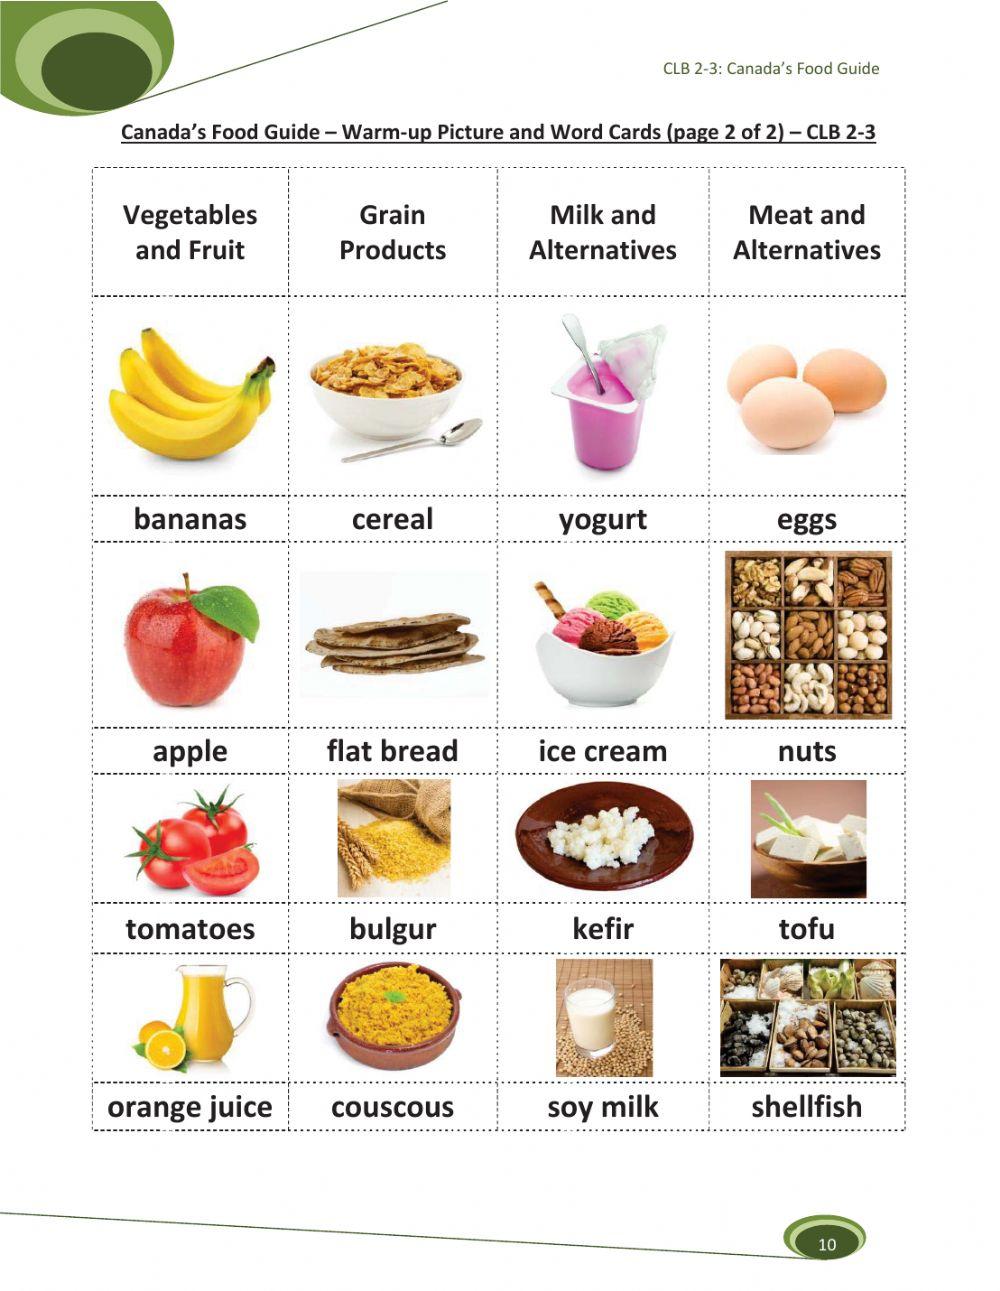 Foods and Categories